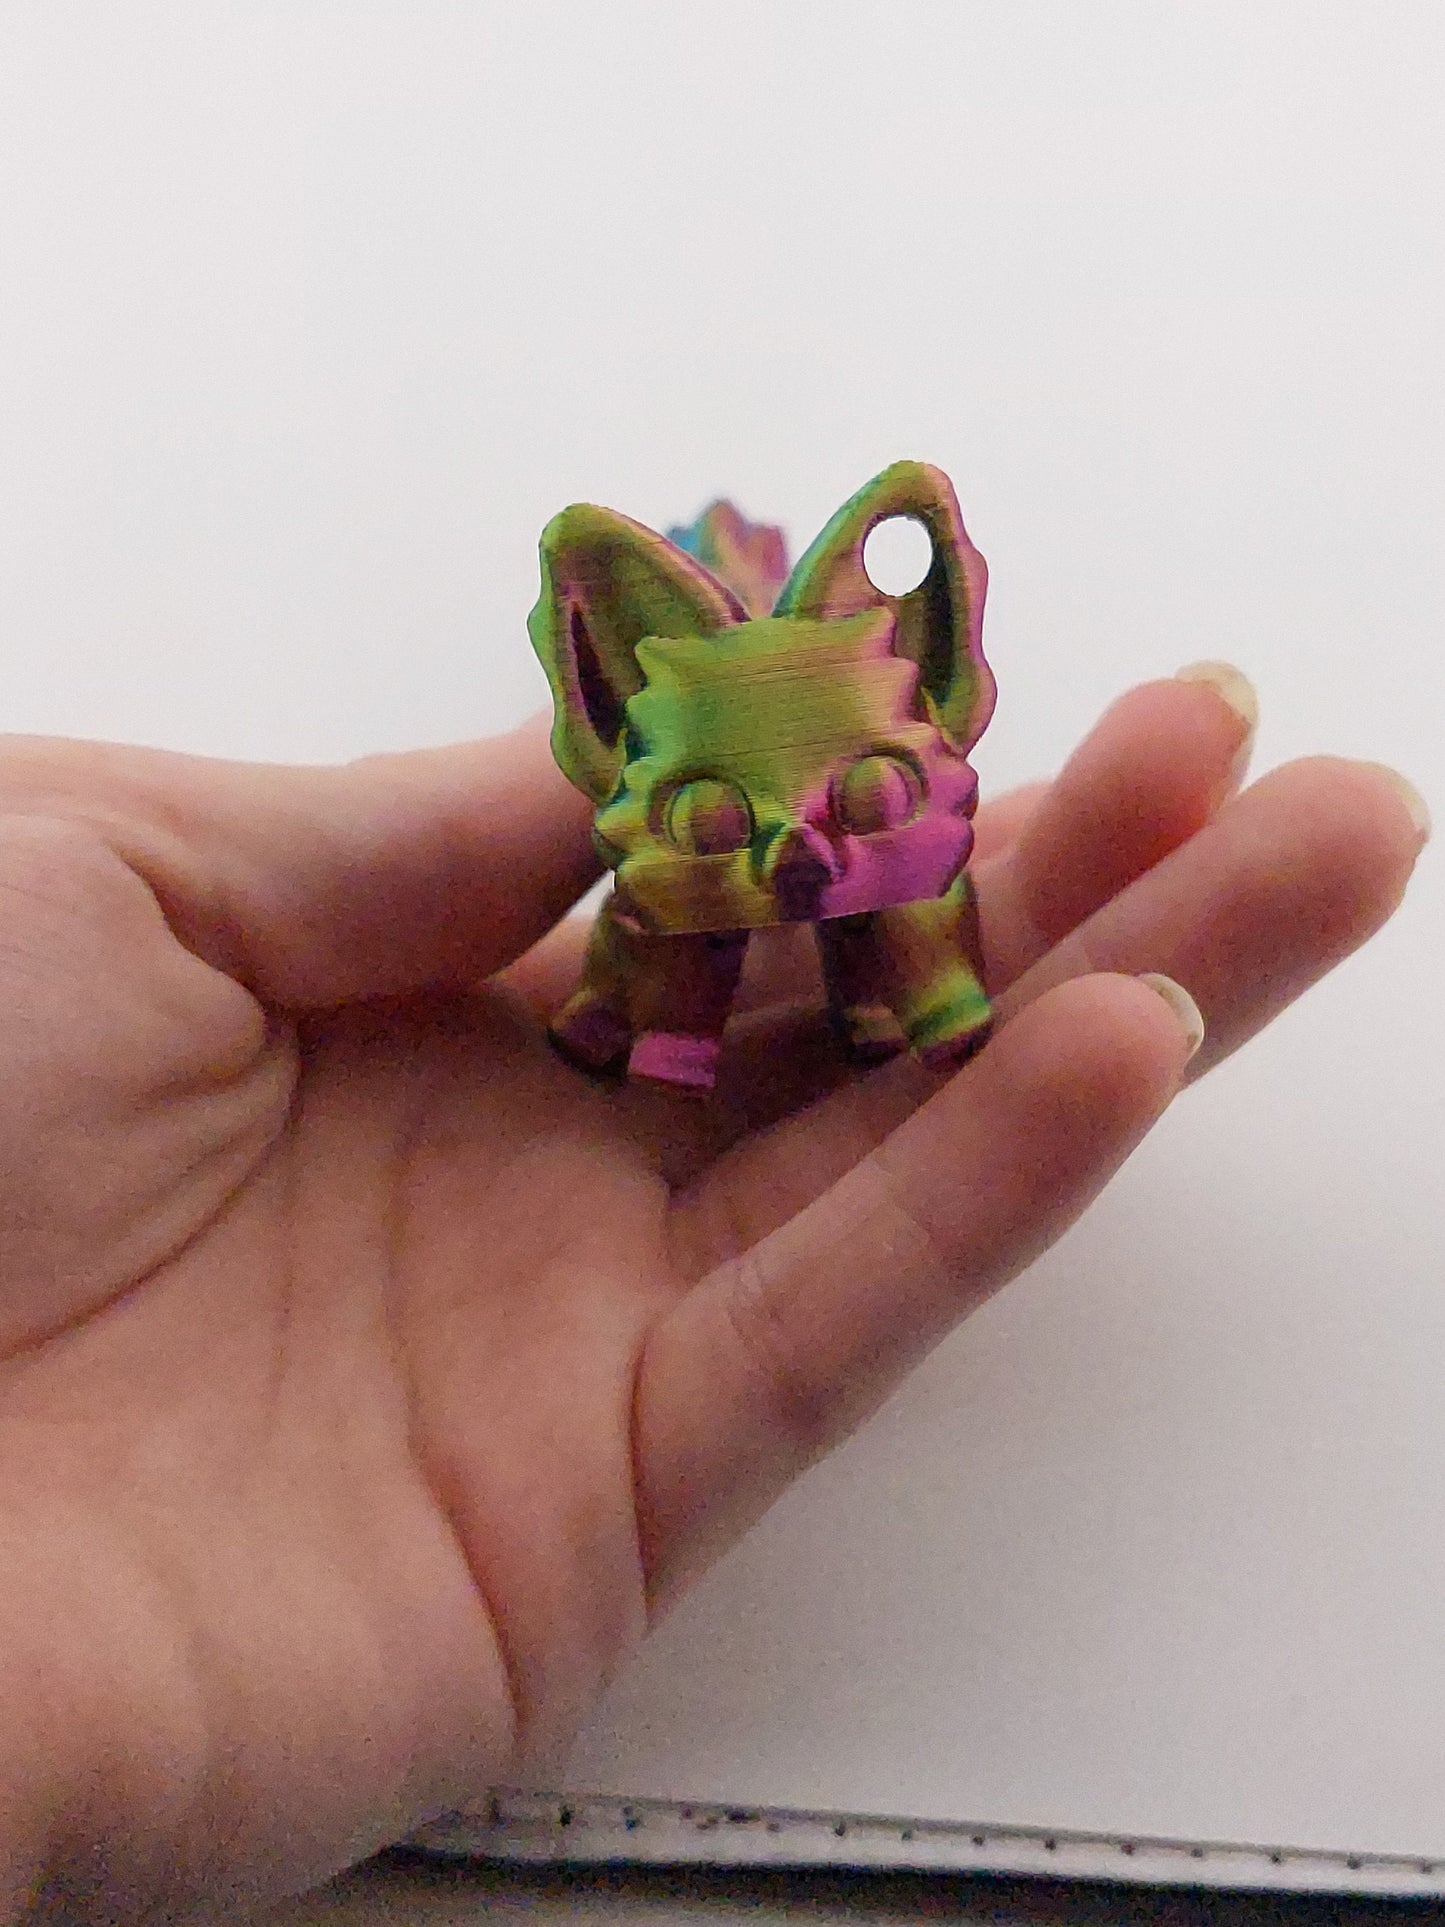 1 Articulated Forest Fox Keychain - Decor Gift - 3D Printed Fidget Fantasy Creature - Customizable Colors - Authorized Seller